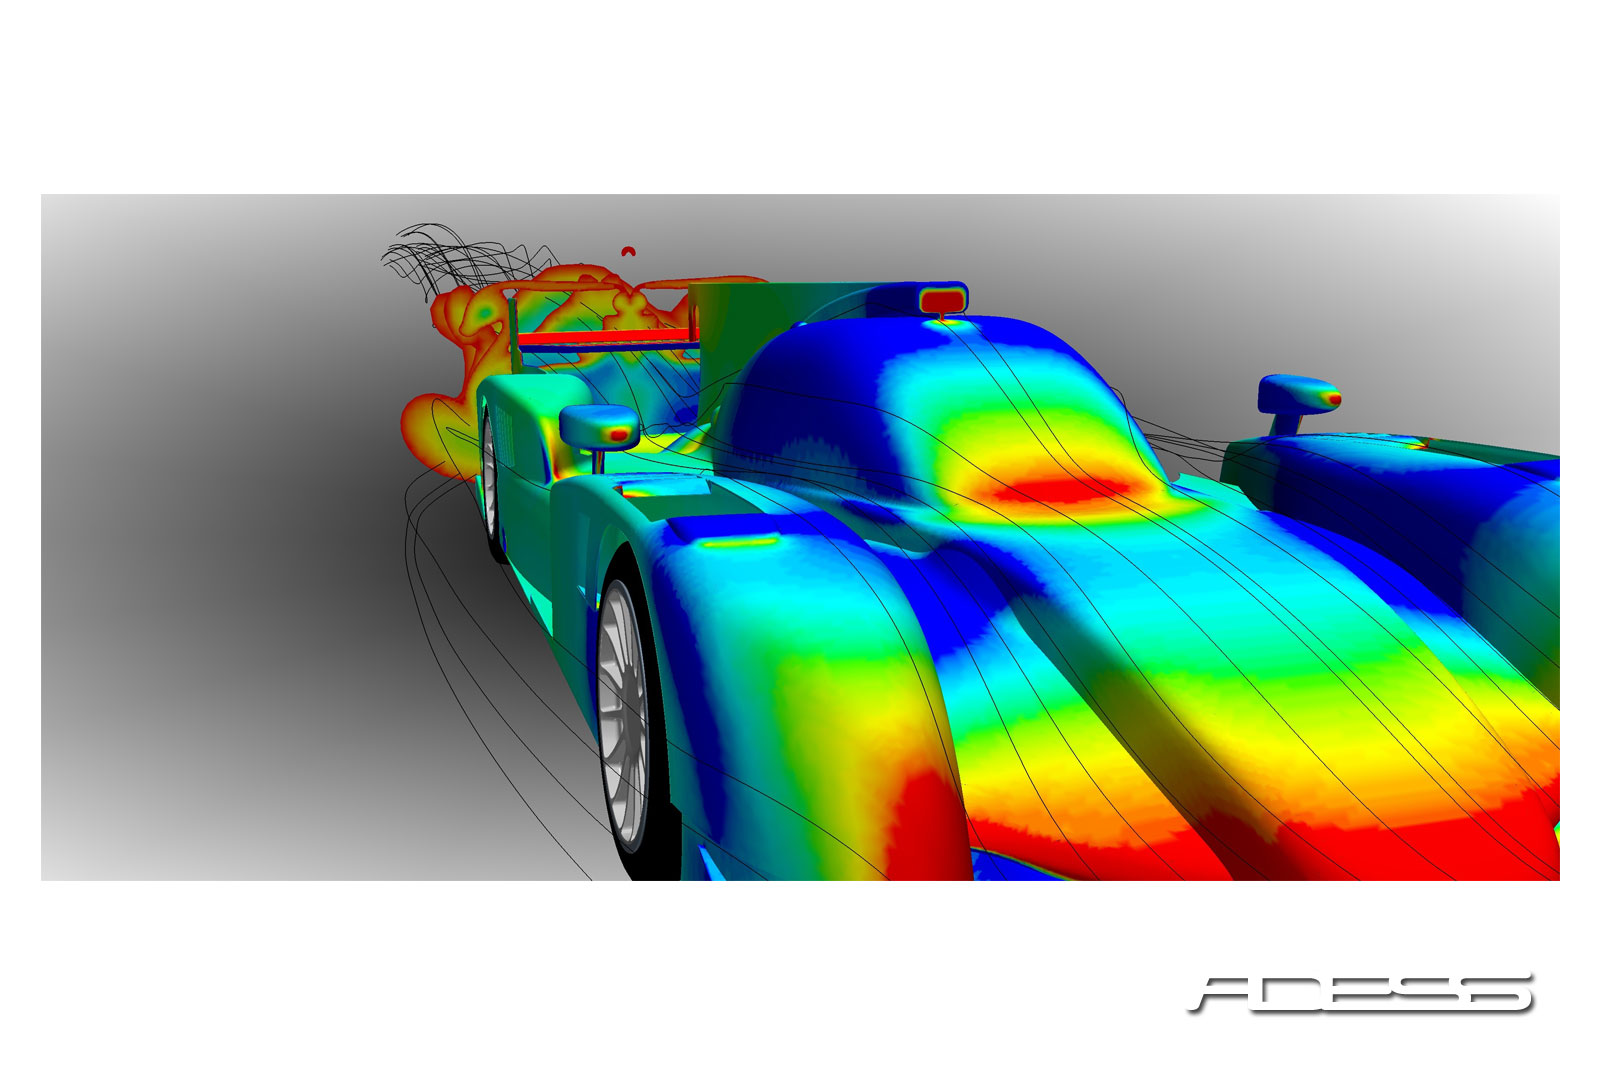 Static pressure distribution and wake behind a Le Mans Prototype